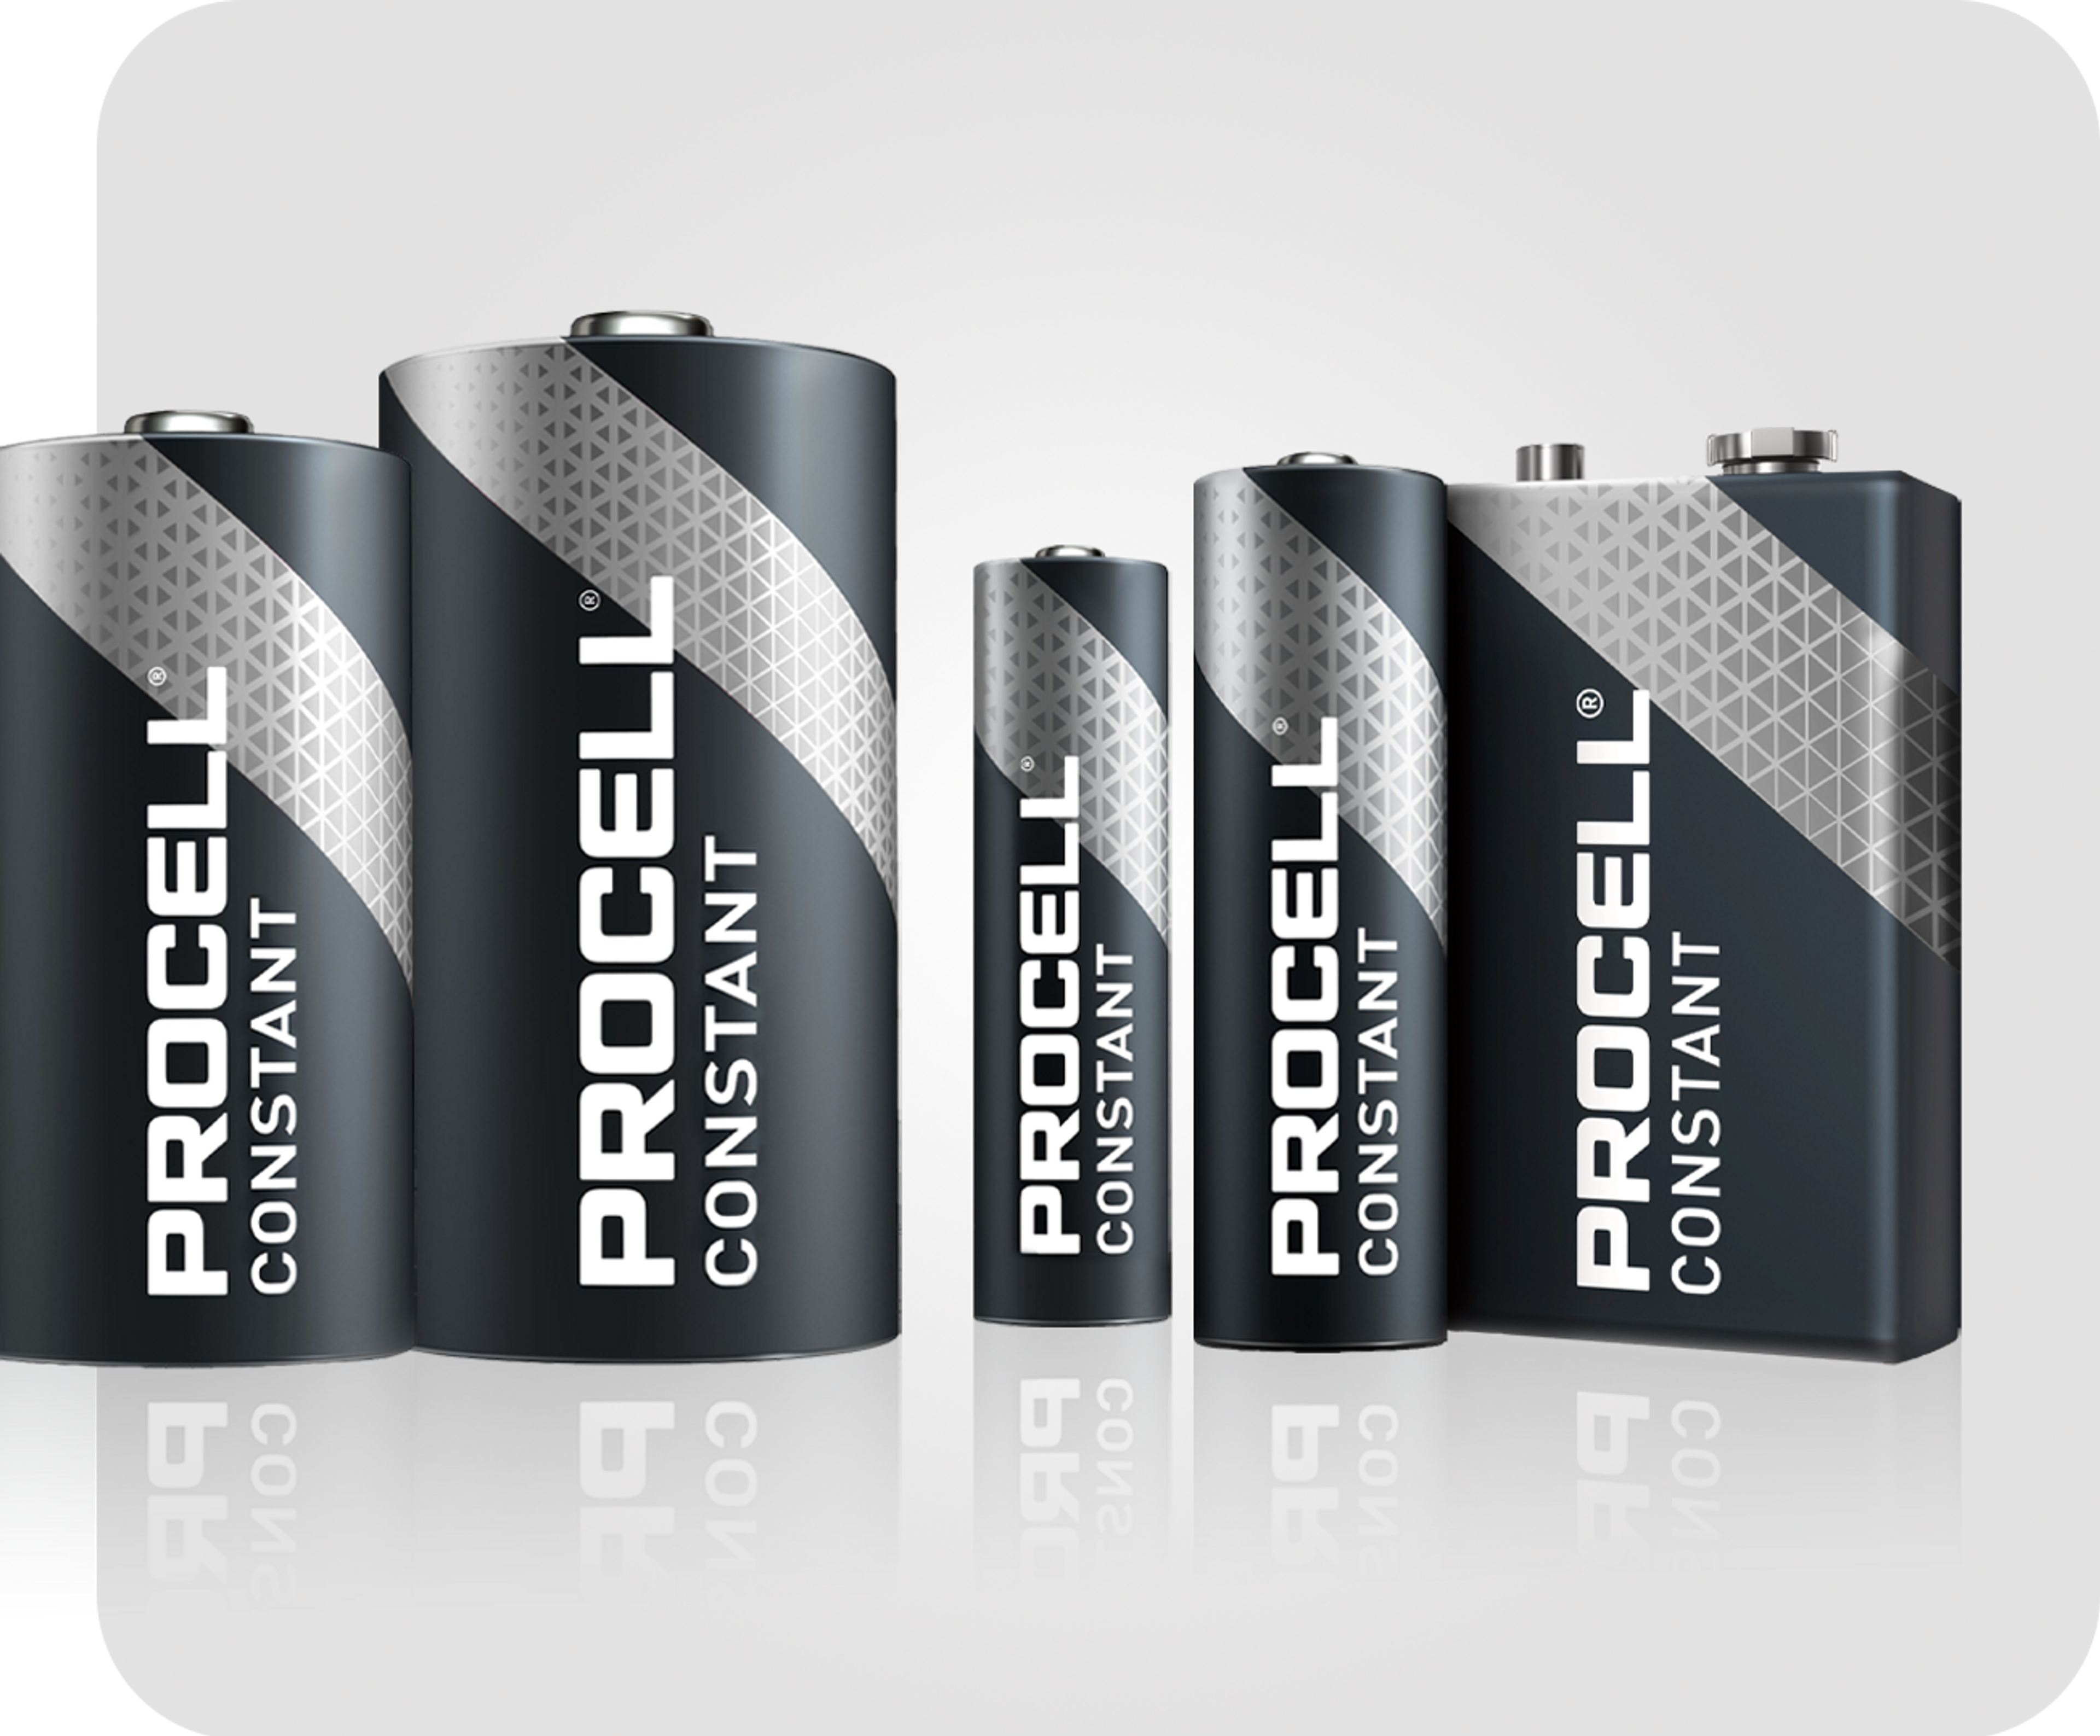 Image of various Duracell Coppertop batteries in popular sizes: AA, AAA, C, D and 9-volt.